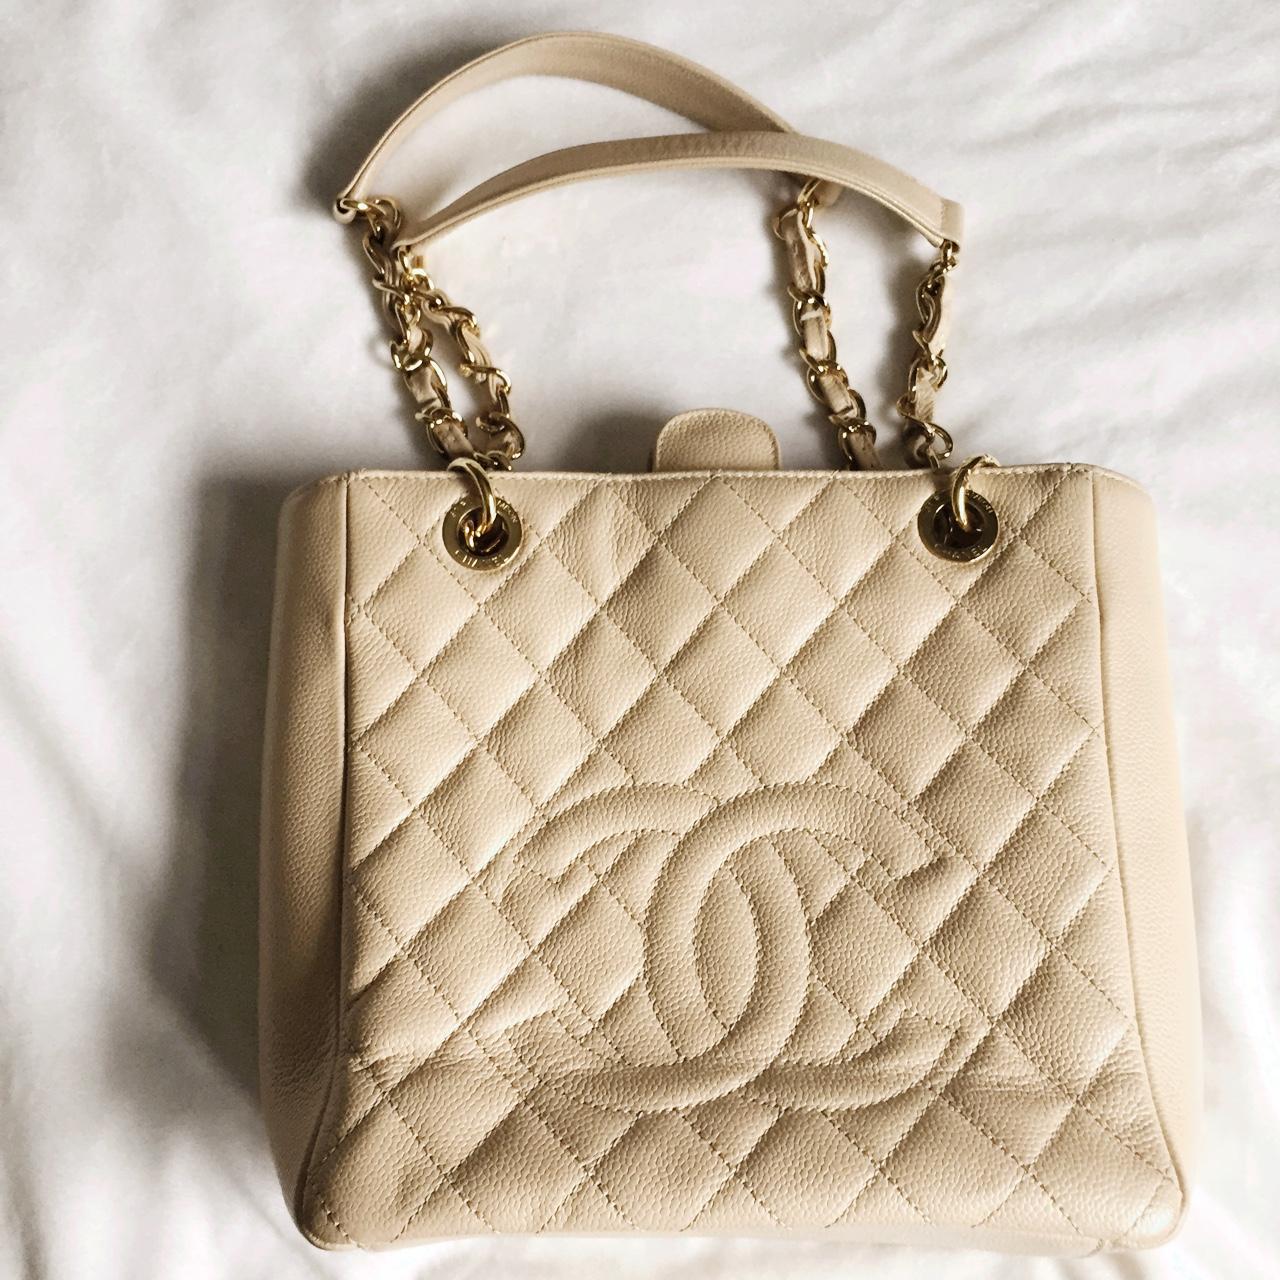 Authentic Chanel PST beige caviar. Signs of wear are